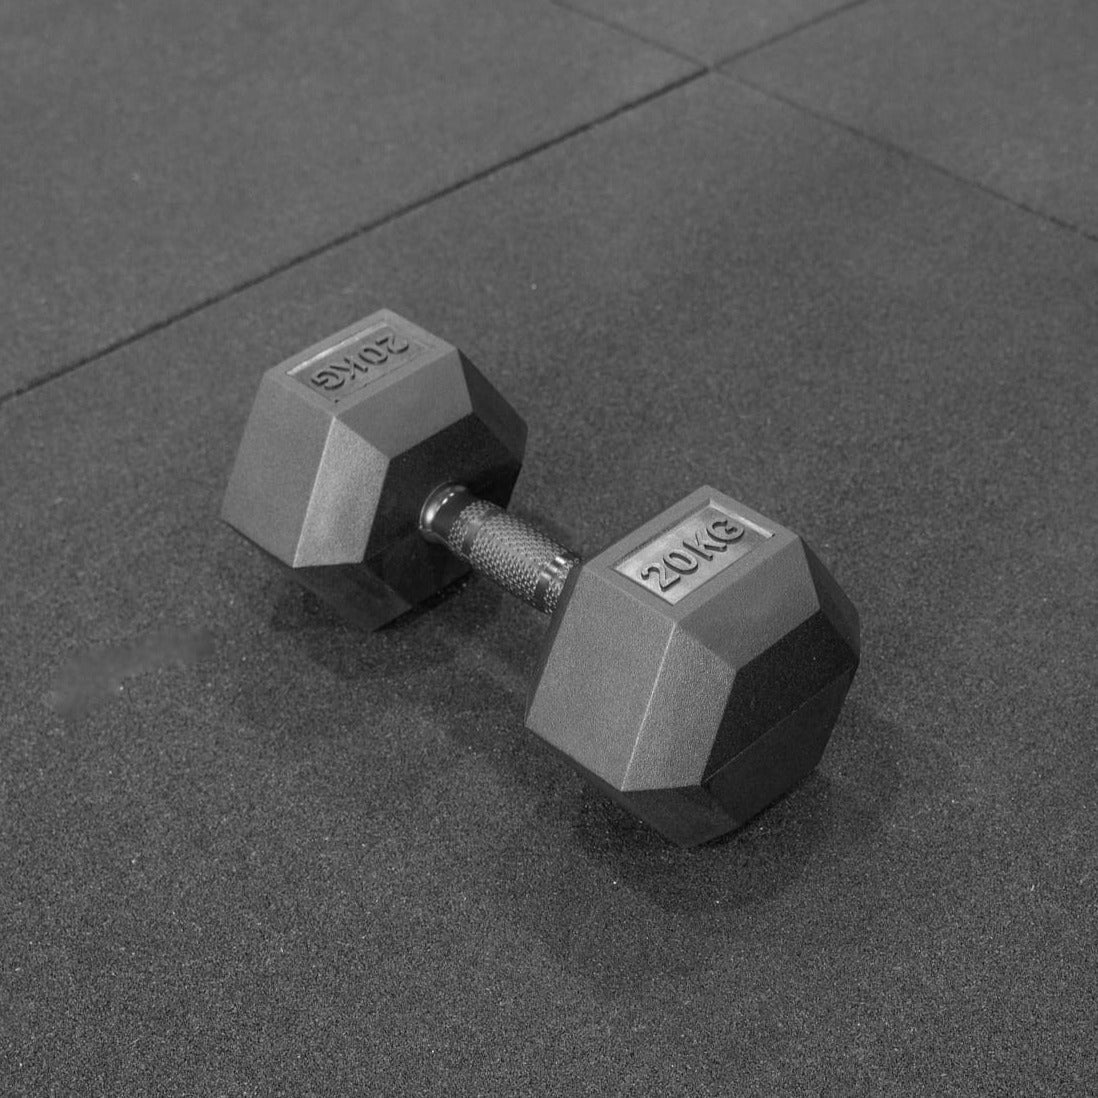 USED / PRE OWNED Hex Dumbbells (Premium Full Black Rubber Handle) 5kg - 45kg Sold Individually